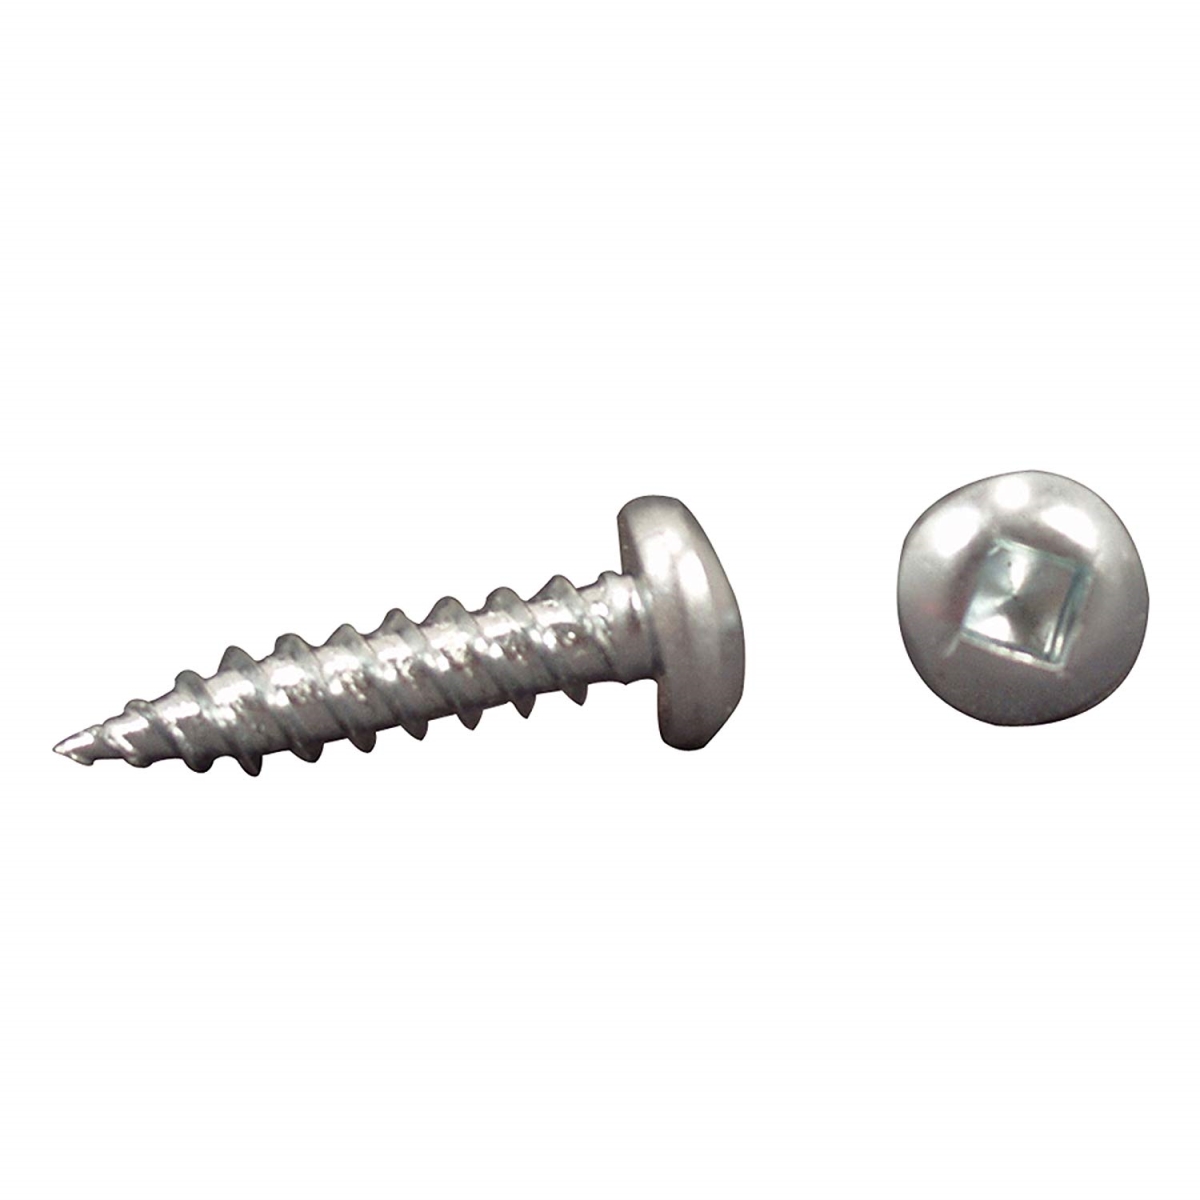 UPC 711217000058 product image for 1103.1309 012-PTK500 8 x 1.25 in. Pan Head Square Recess Screw - Pack of 500 | upcitemdb.com